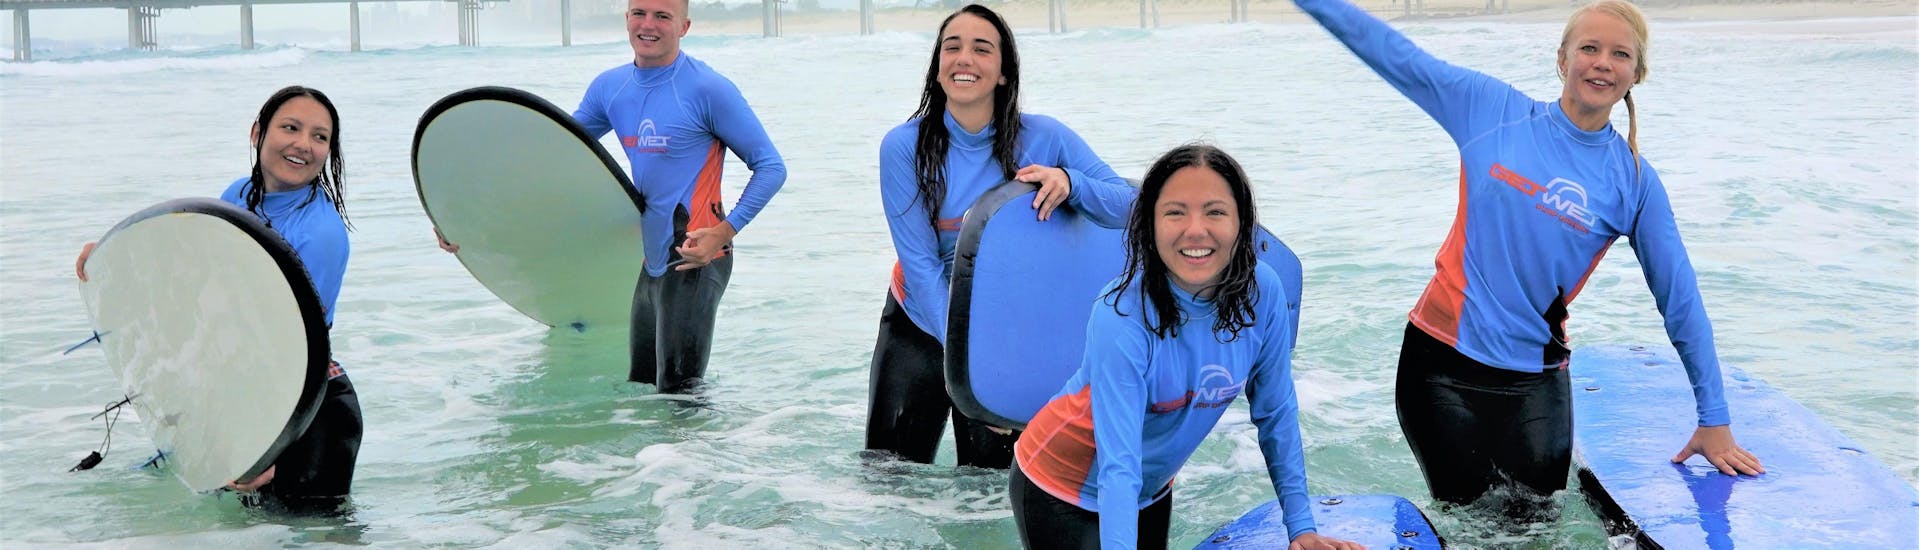 surf-lessons-in-gold-coast-for-adults-get-wet-surf-school